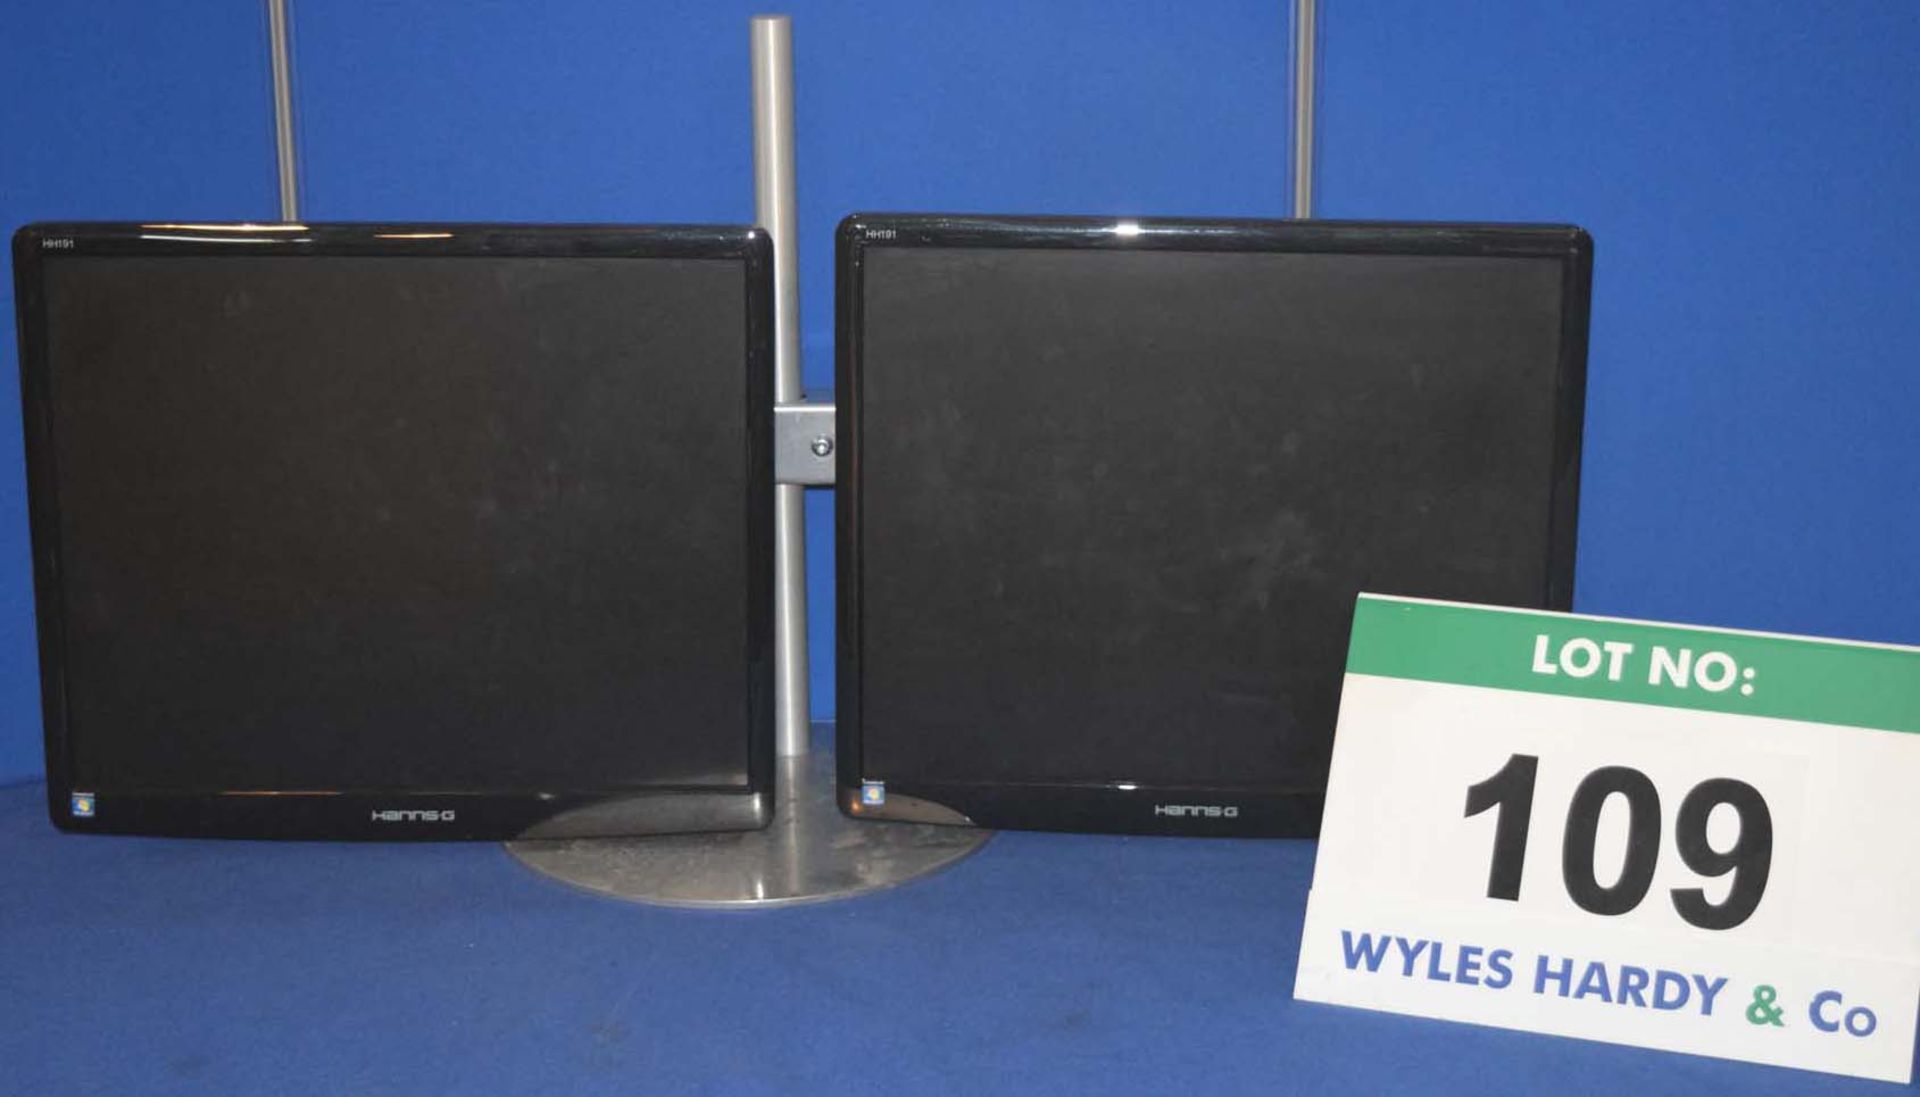 2: HANNS G 19" Flat Panel Displays on an Adjustable Twin Monitor Stand